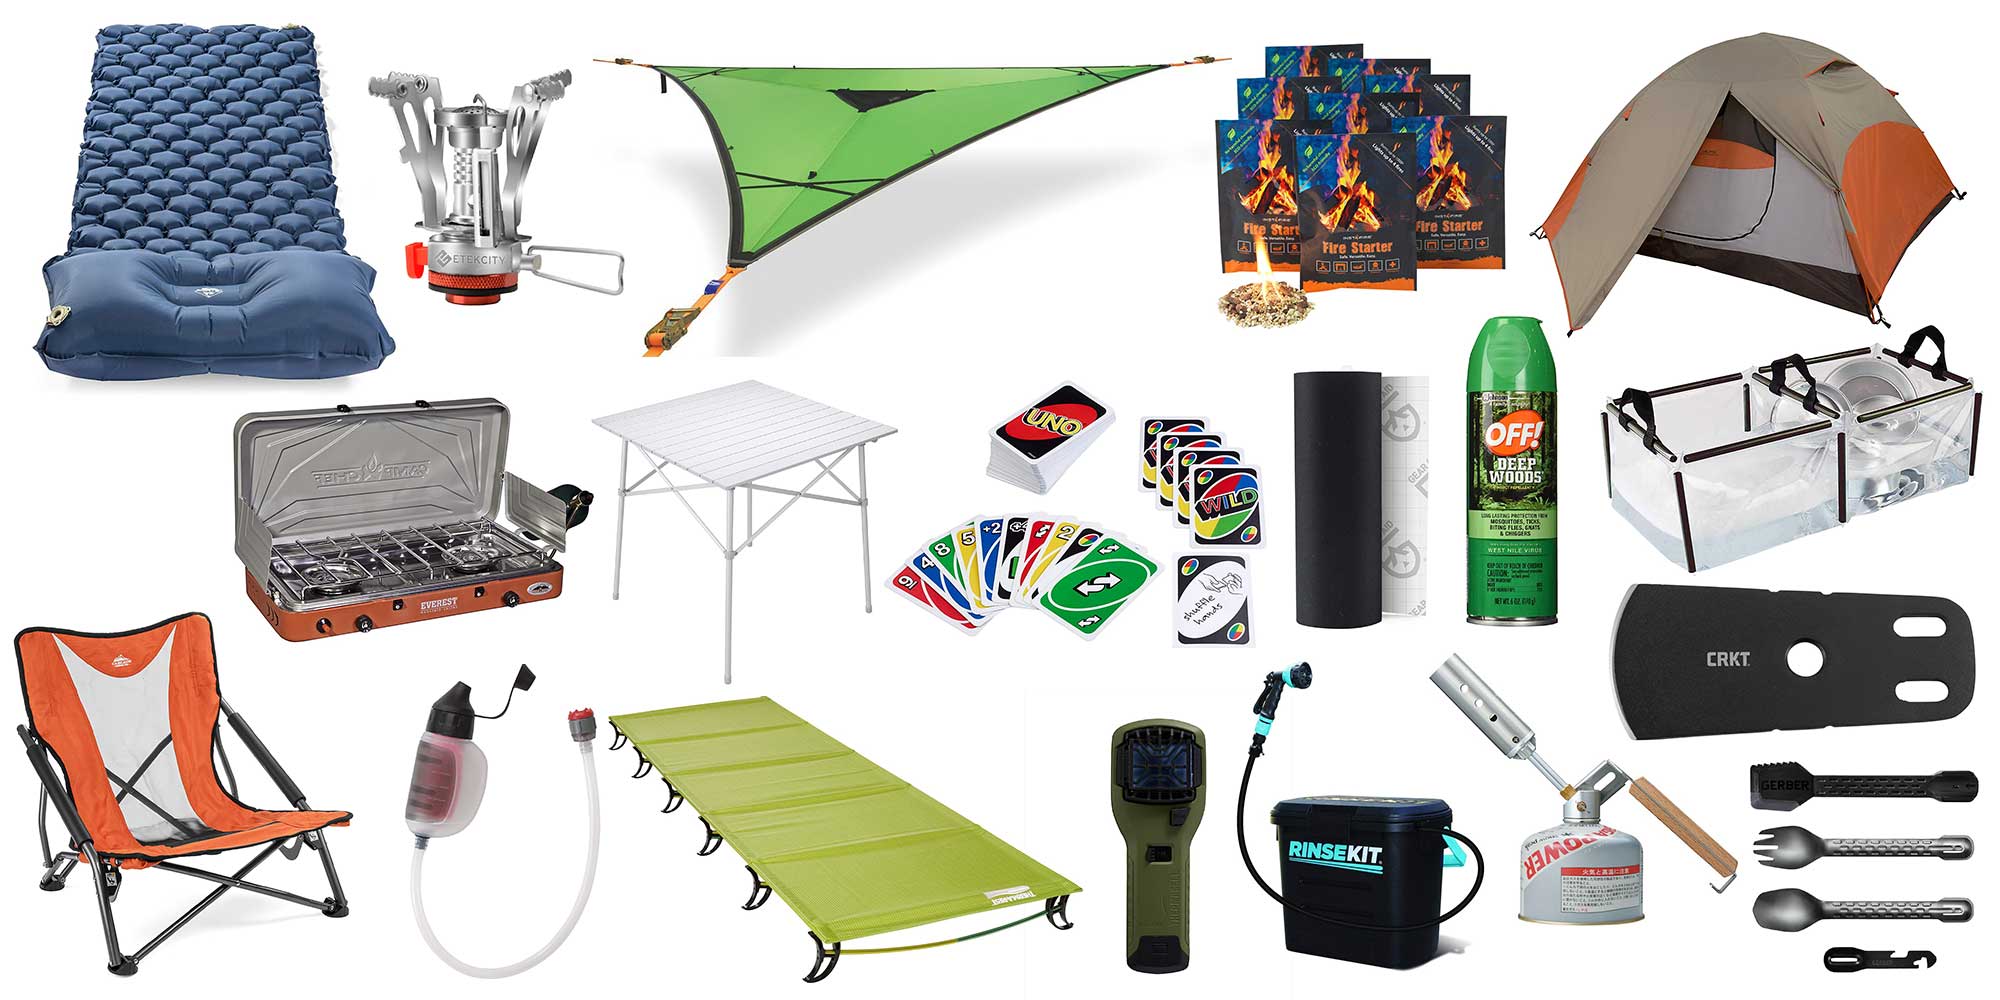 Camping Accessories, 20 Awesome Outdoor Necessities and Niceties